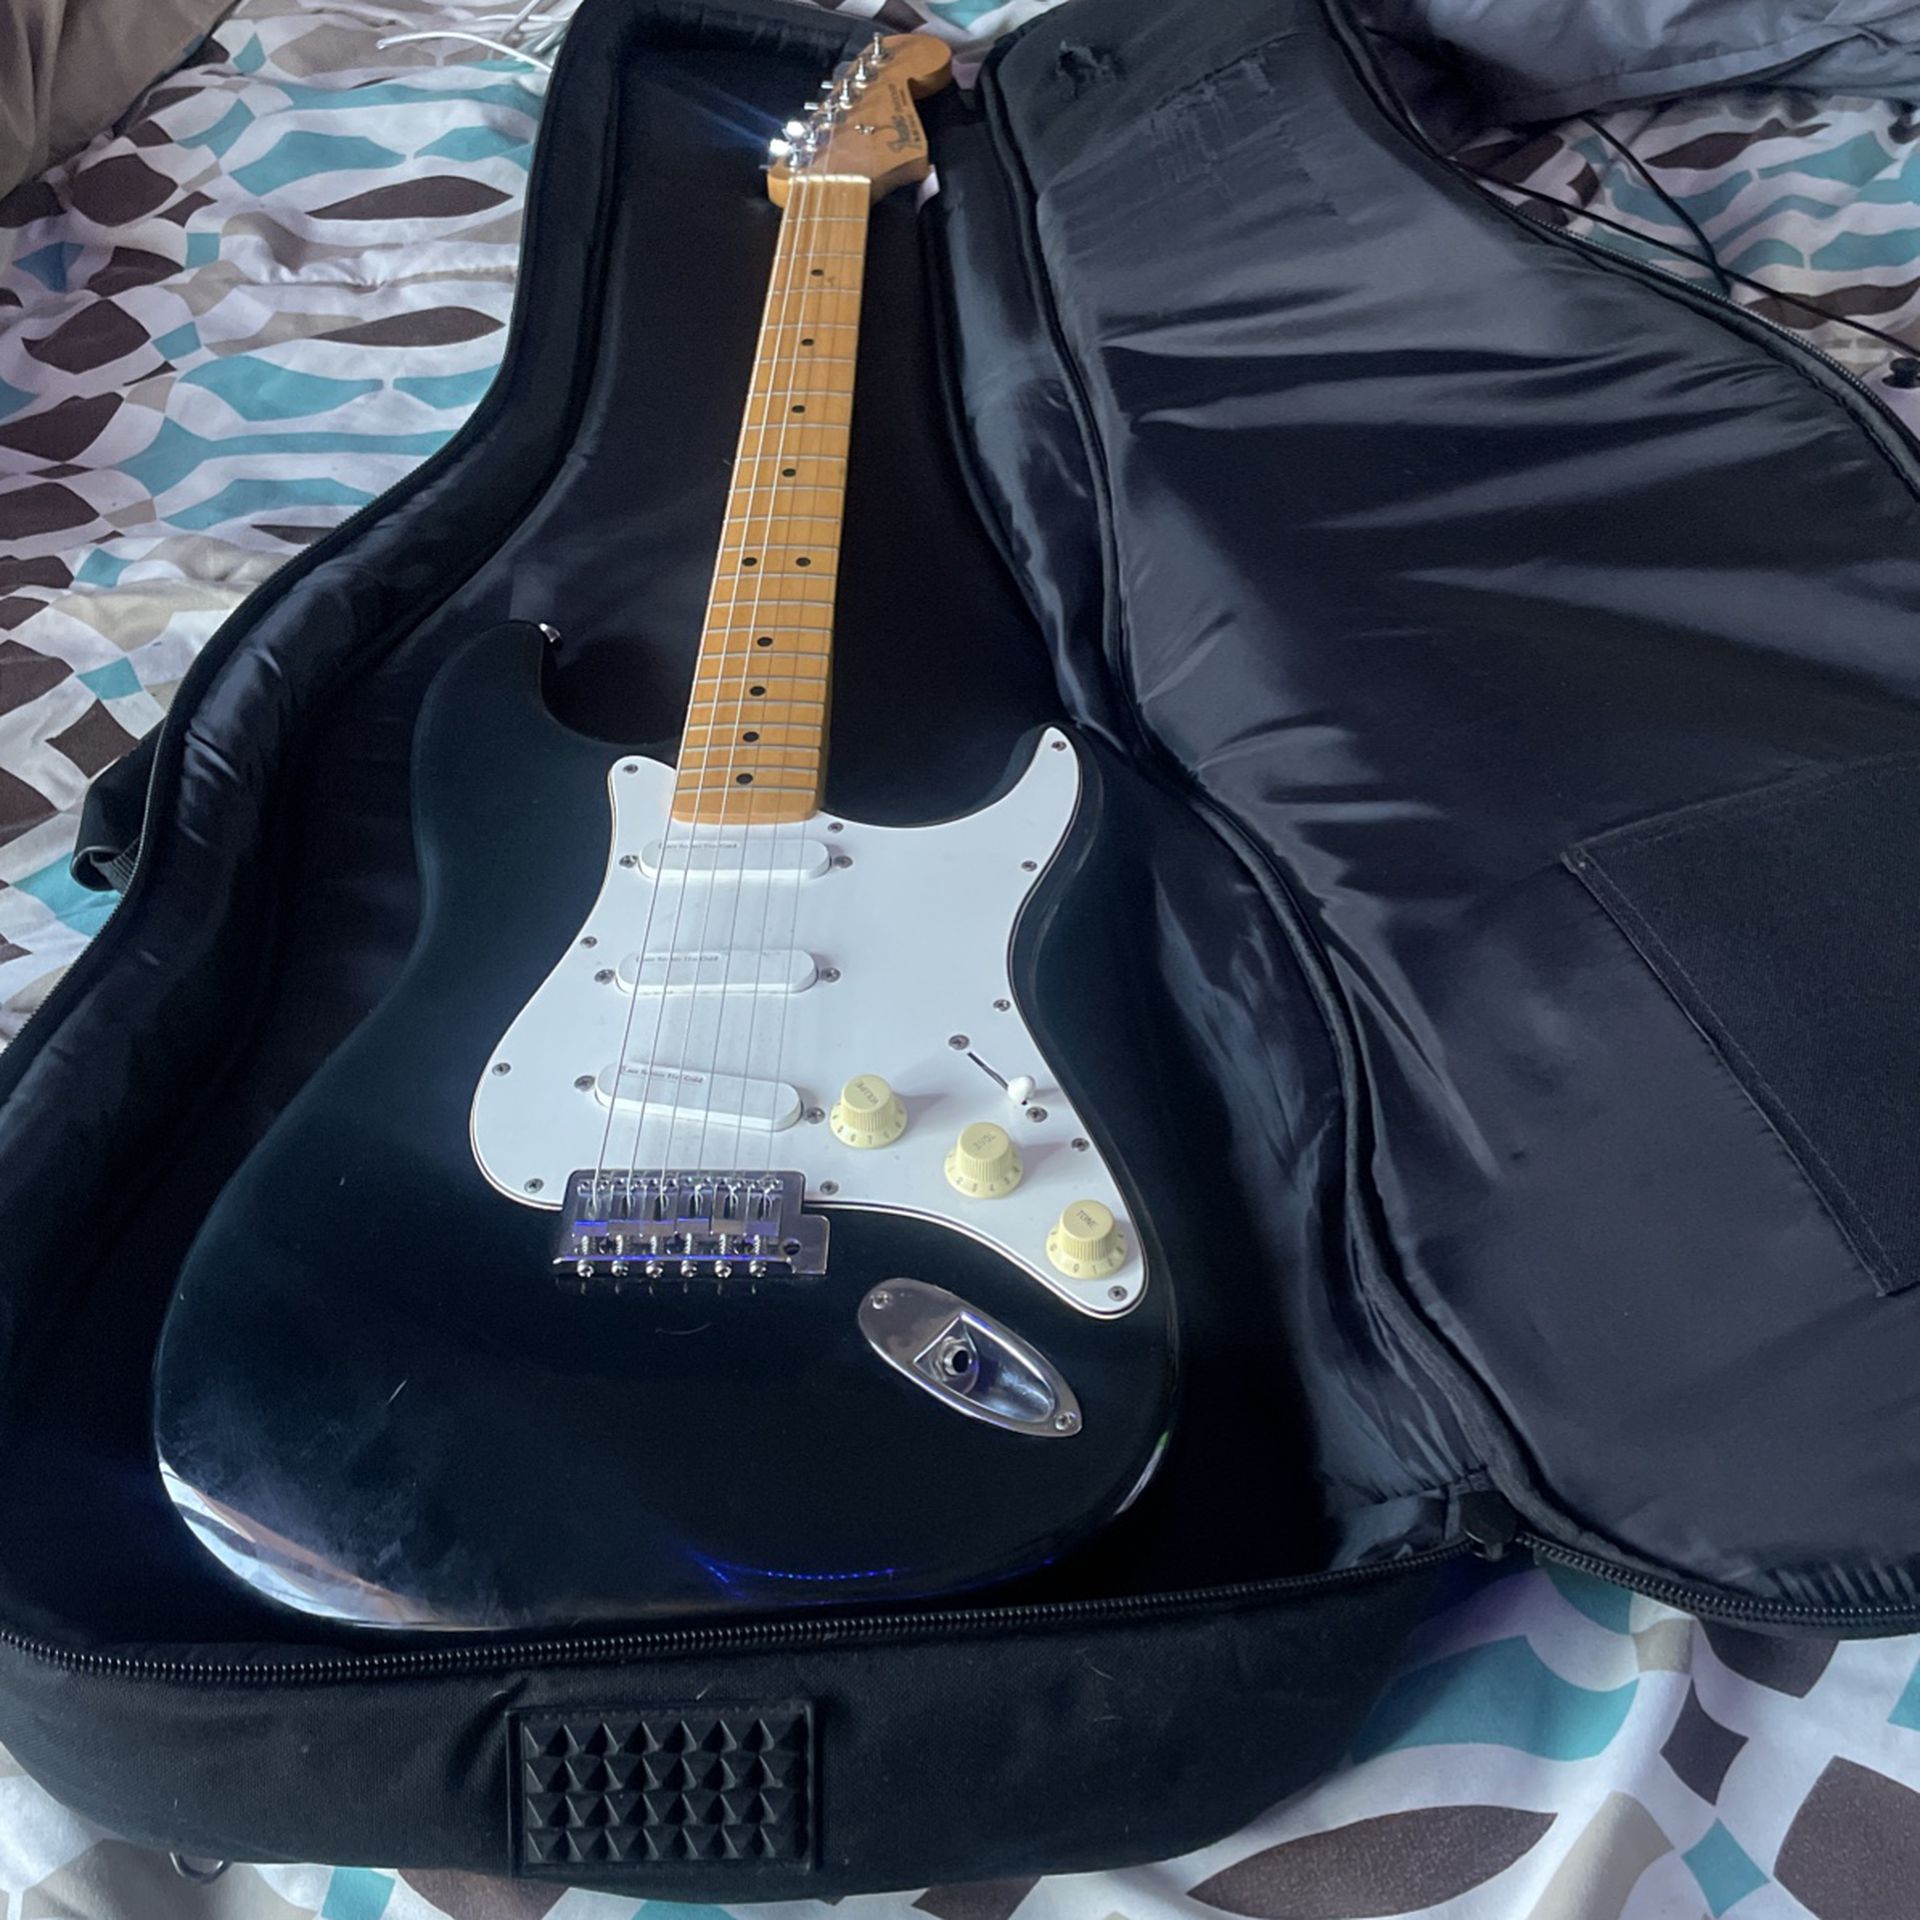 Fender Stratocaster Guitar (Authenticed) 